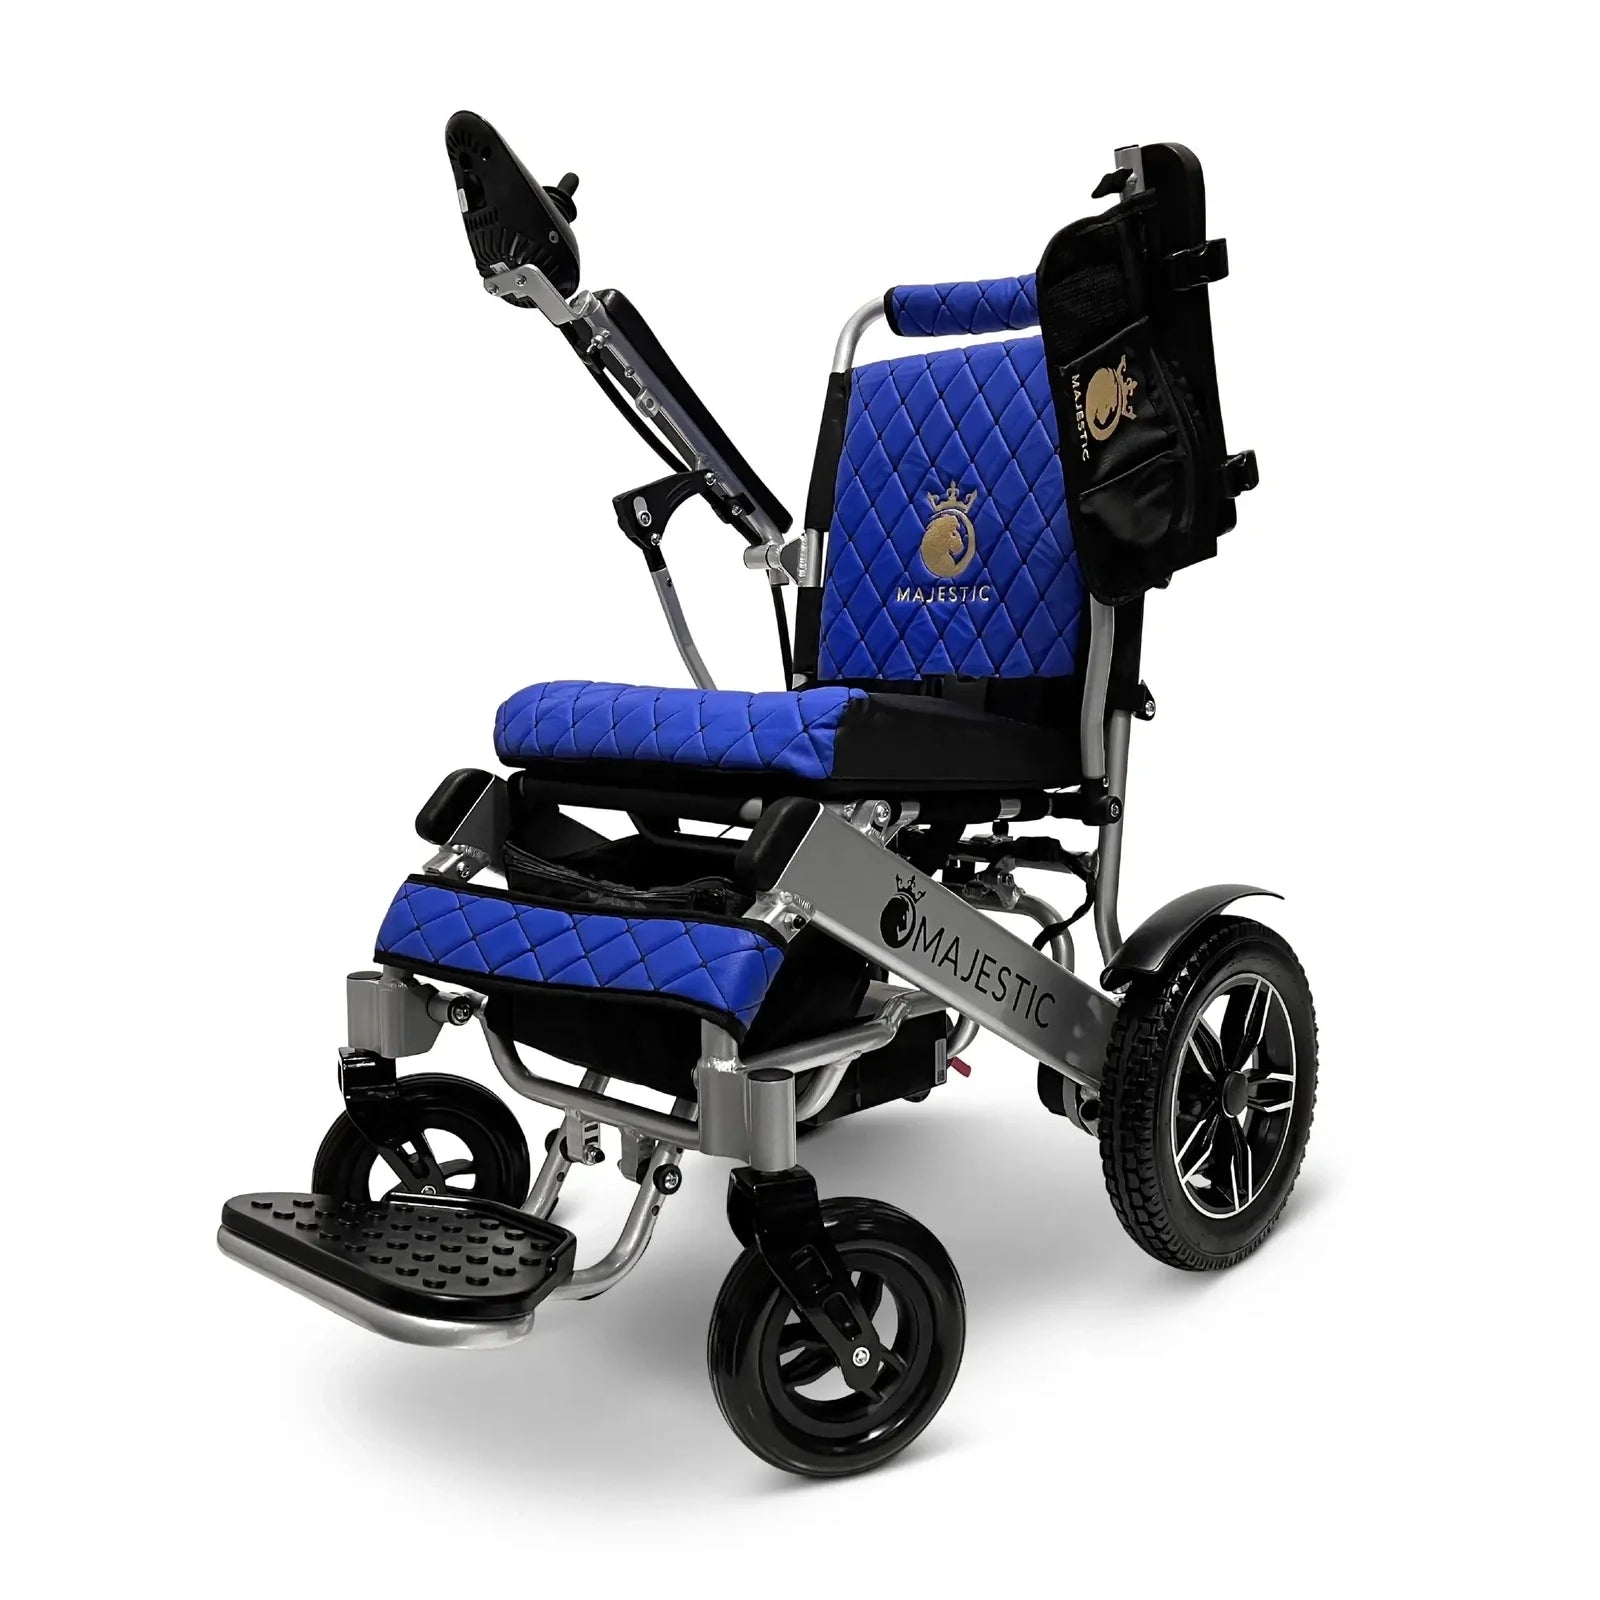 ComfyGO Majestic IQ-8000 Remote Controlled Lightweight Folding Electric Wheelchair Power Wheelchairs ComfyGO Silver Blue 10 Miles & 17.5" Seat Width